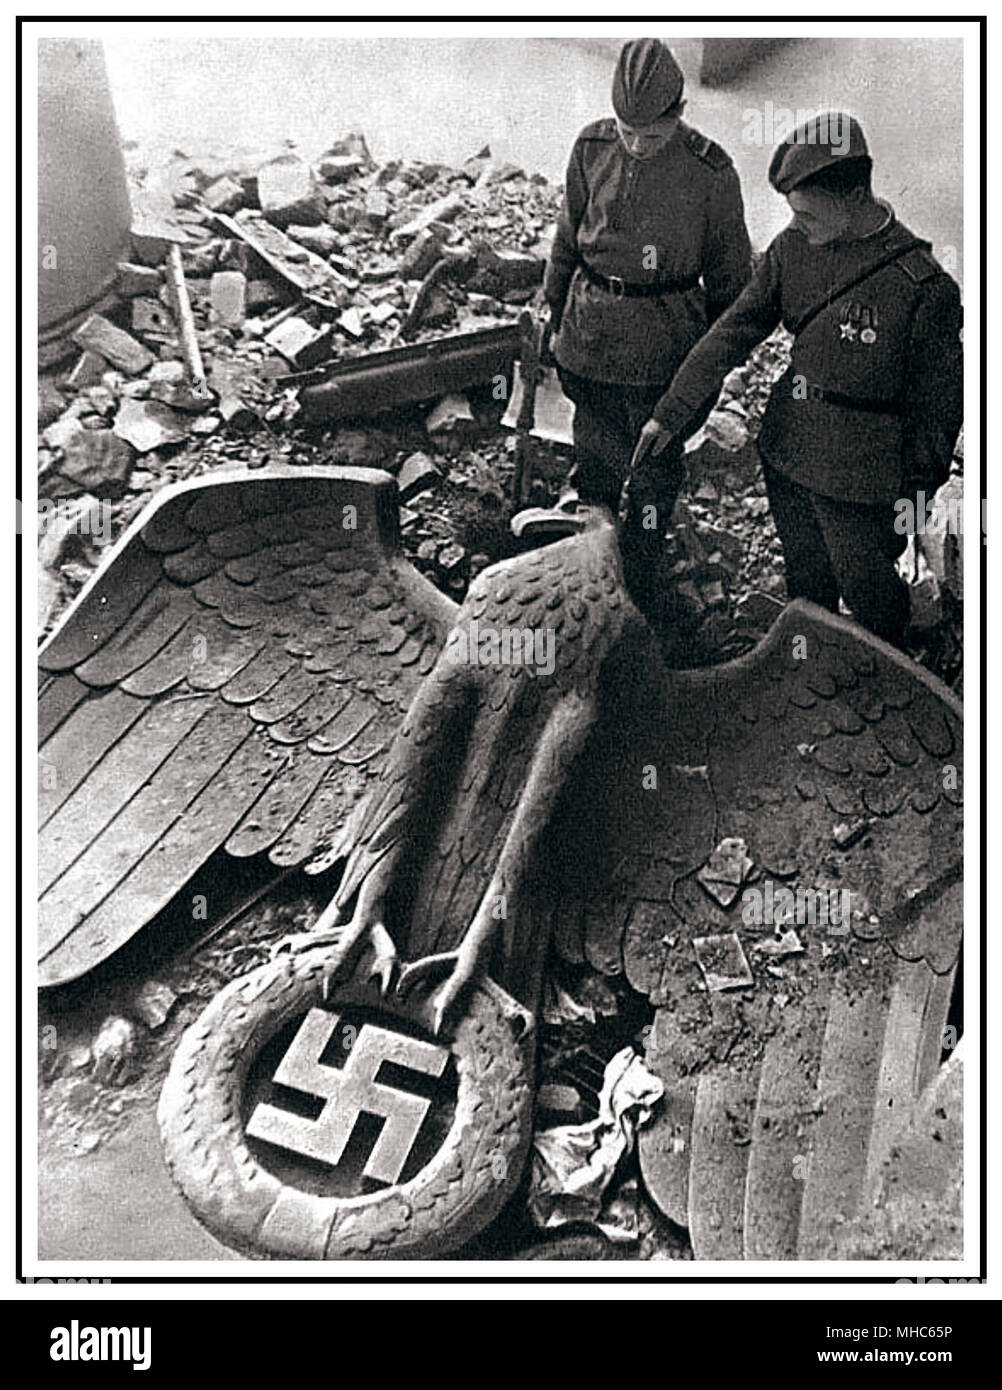 FALL OF BERLIN AND THE THIRD  REICH 1945 WW2 in Europe ends.. Russian soldiers after the fall of Berlin looking at a torn down German Nazi Eagle with Swastika emblem lying in the ruins of former seat of Nazi Germany power, The Reich Chancellery Berlin Germany  'The Fall of The Third Reich' 8 May 1945 World War II Stock Photo